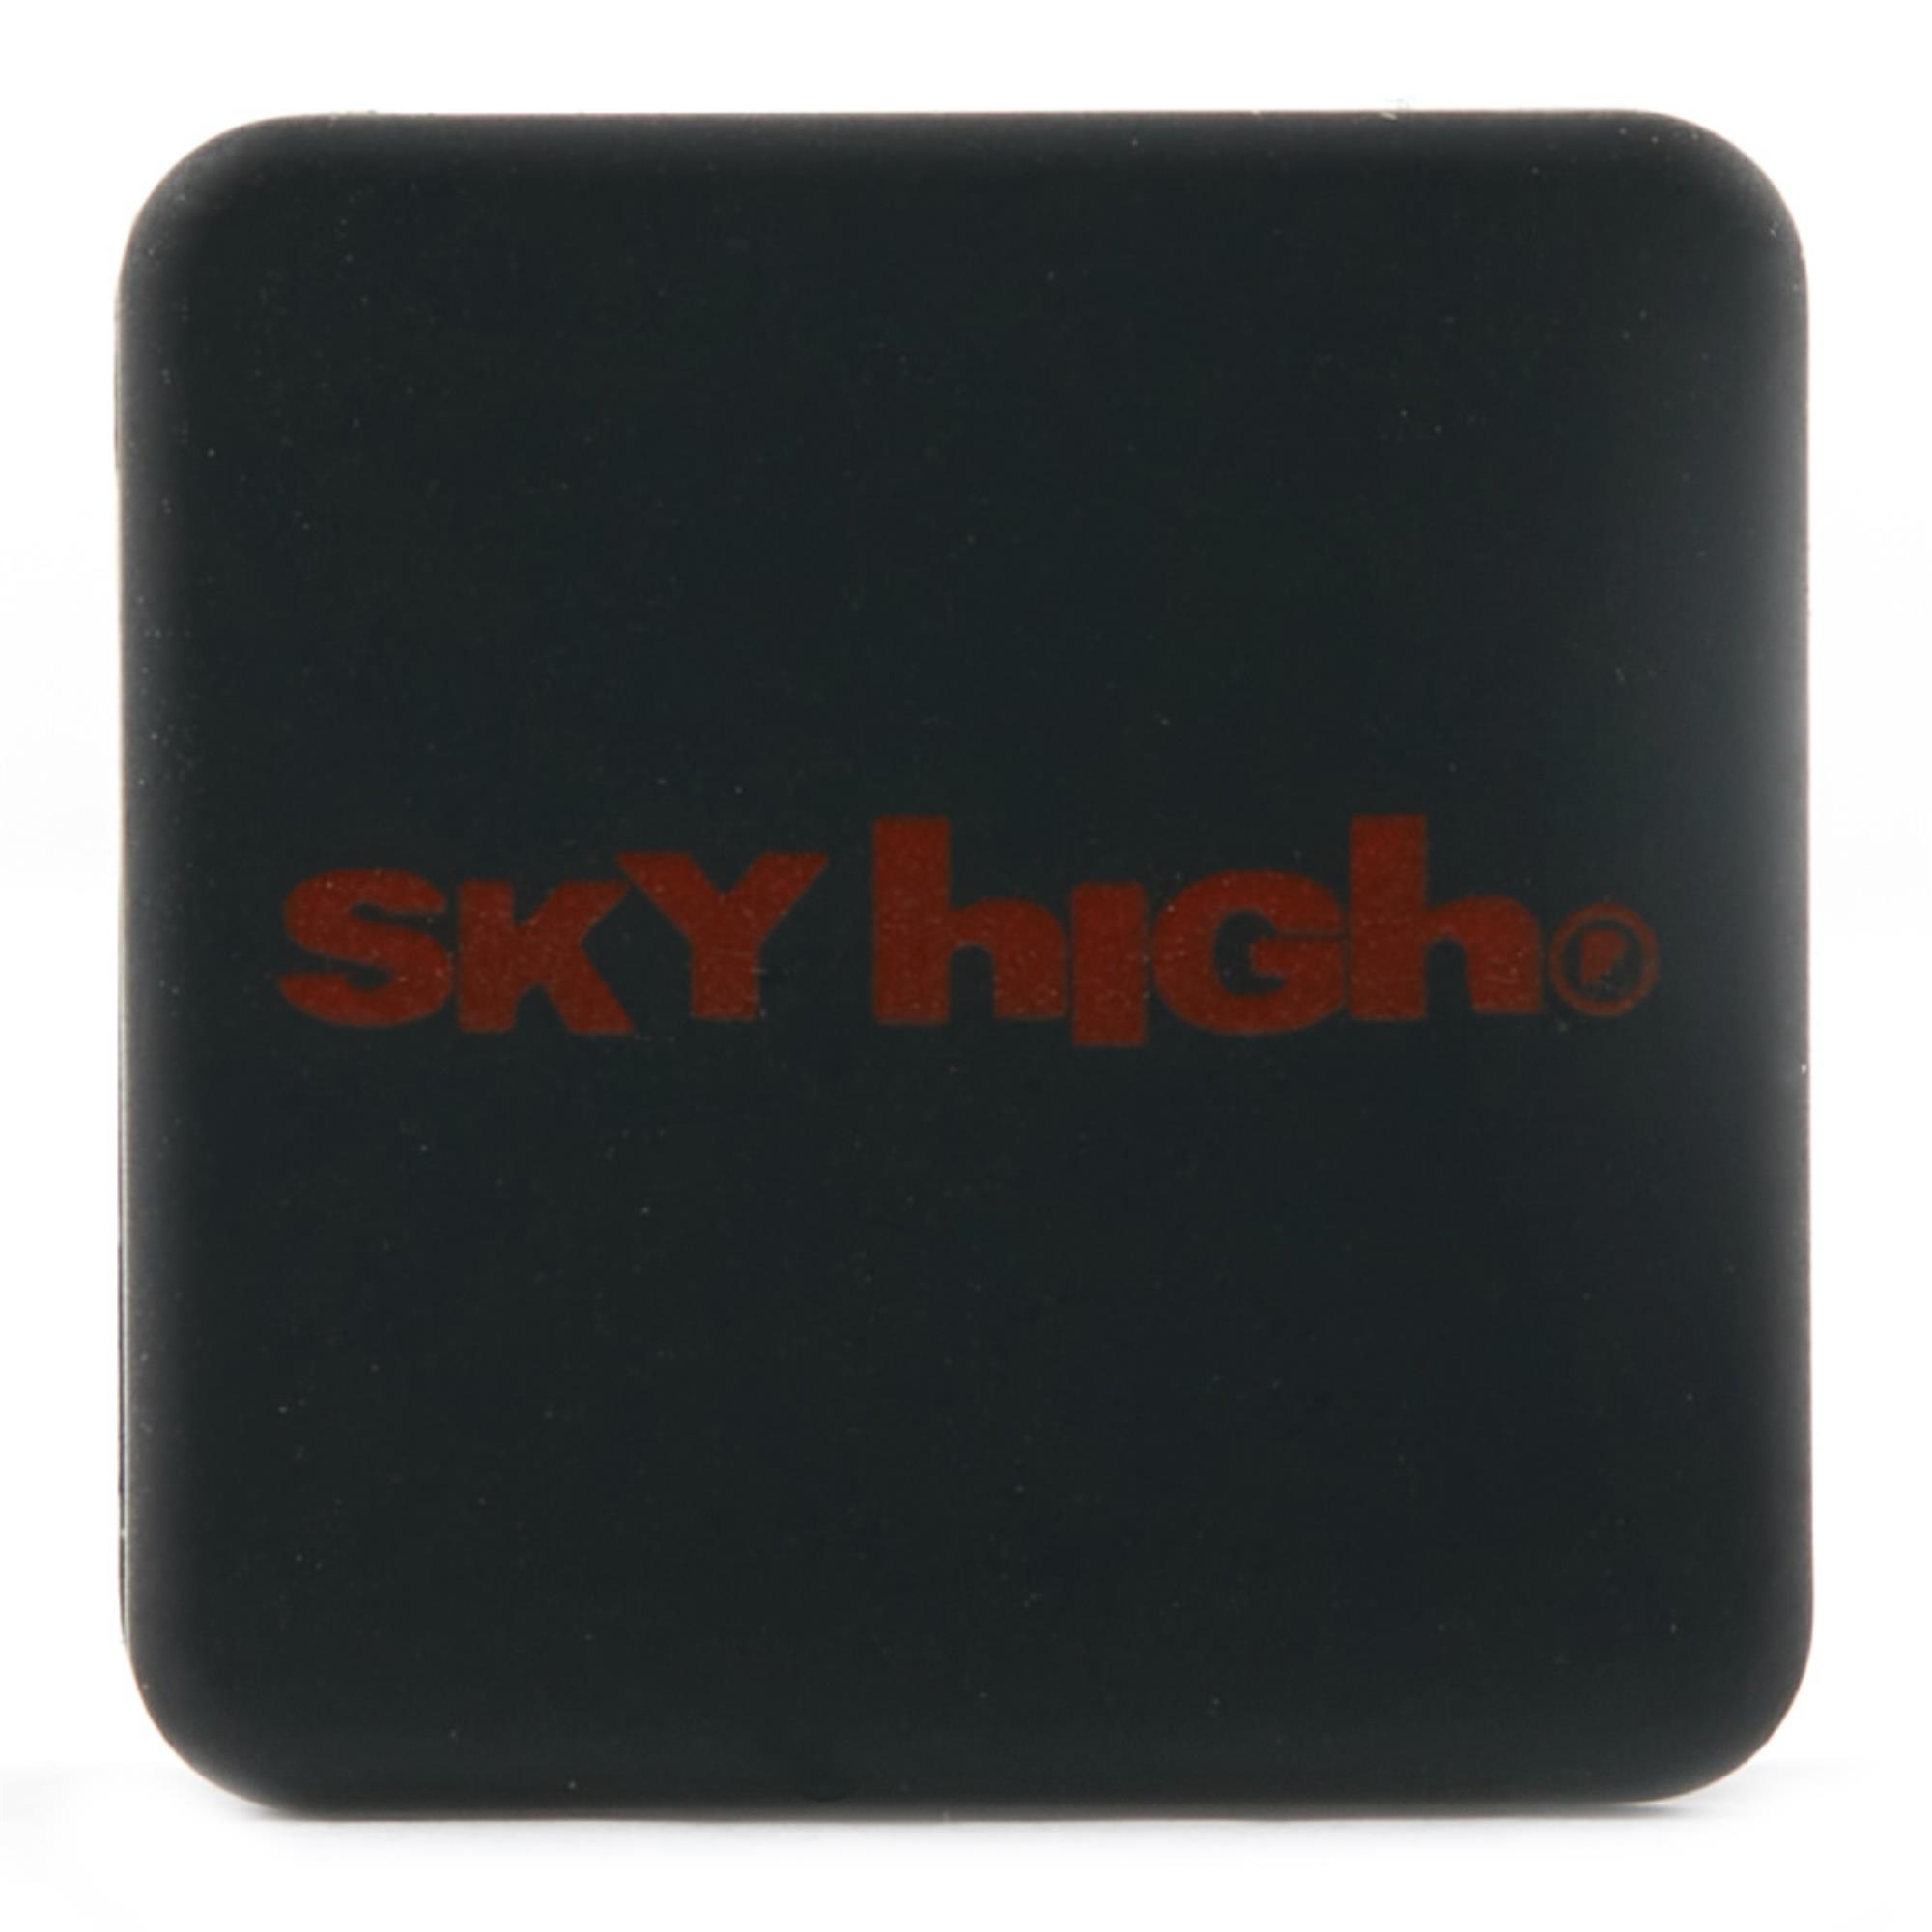 SKY HIGH SQUARES SILICONE CONTAINERS